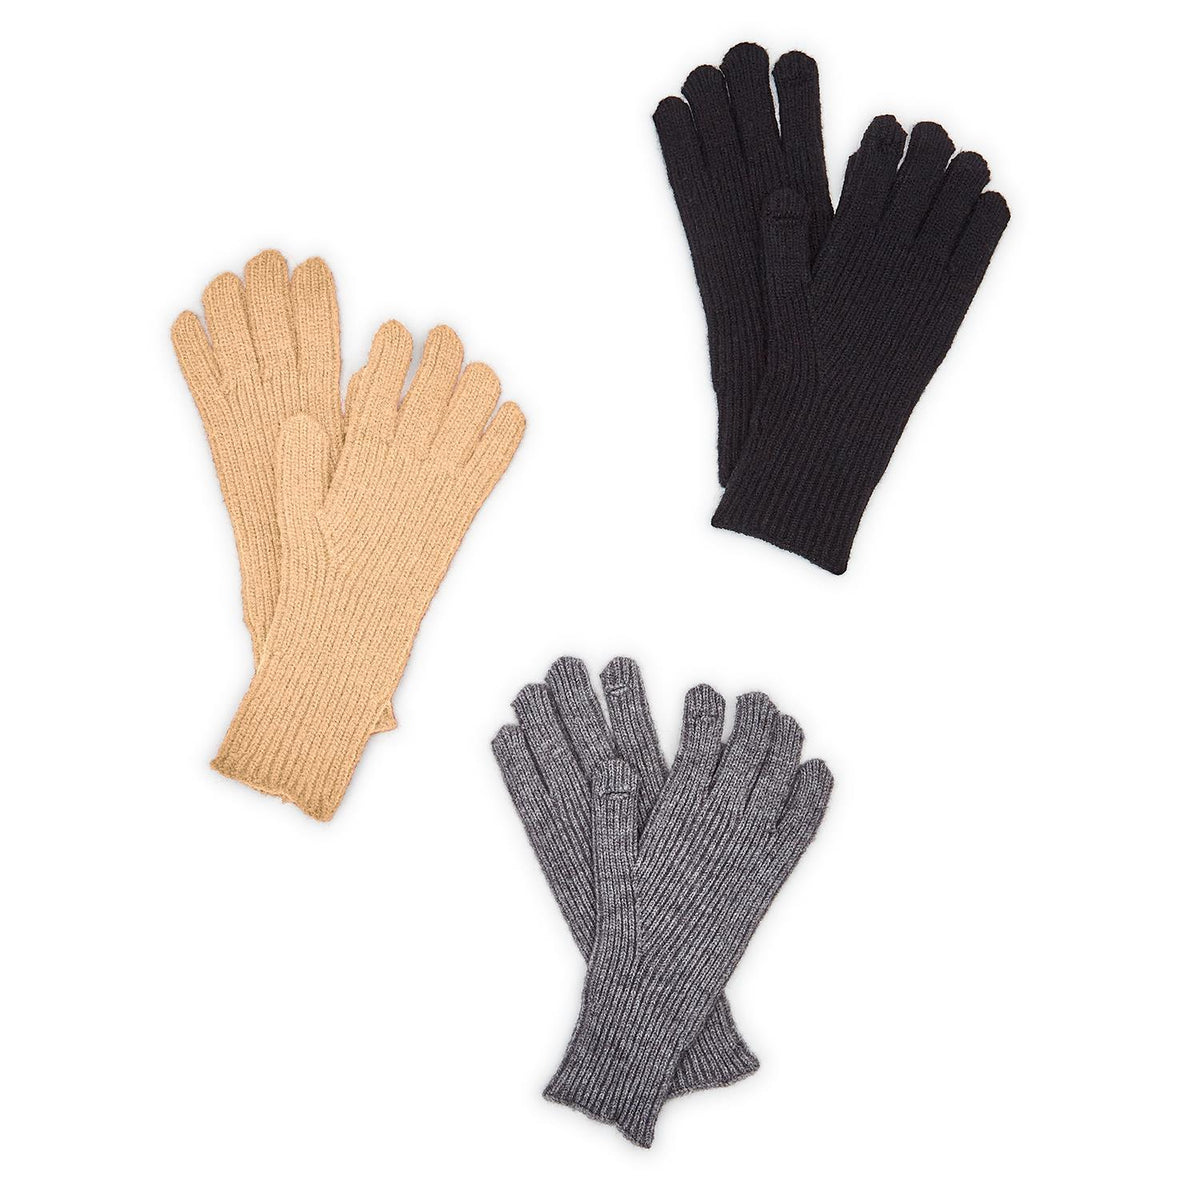 Knit Gloves with Touch Screen Fingertip Access